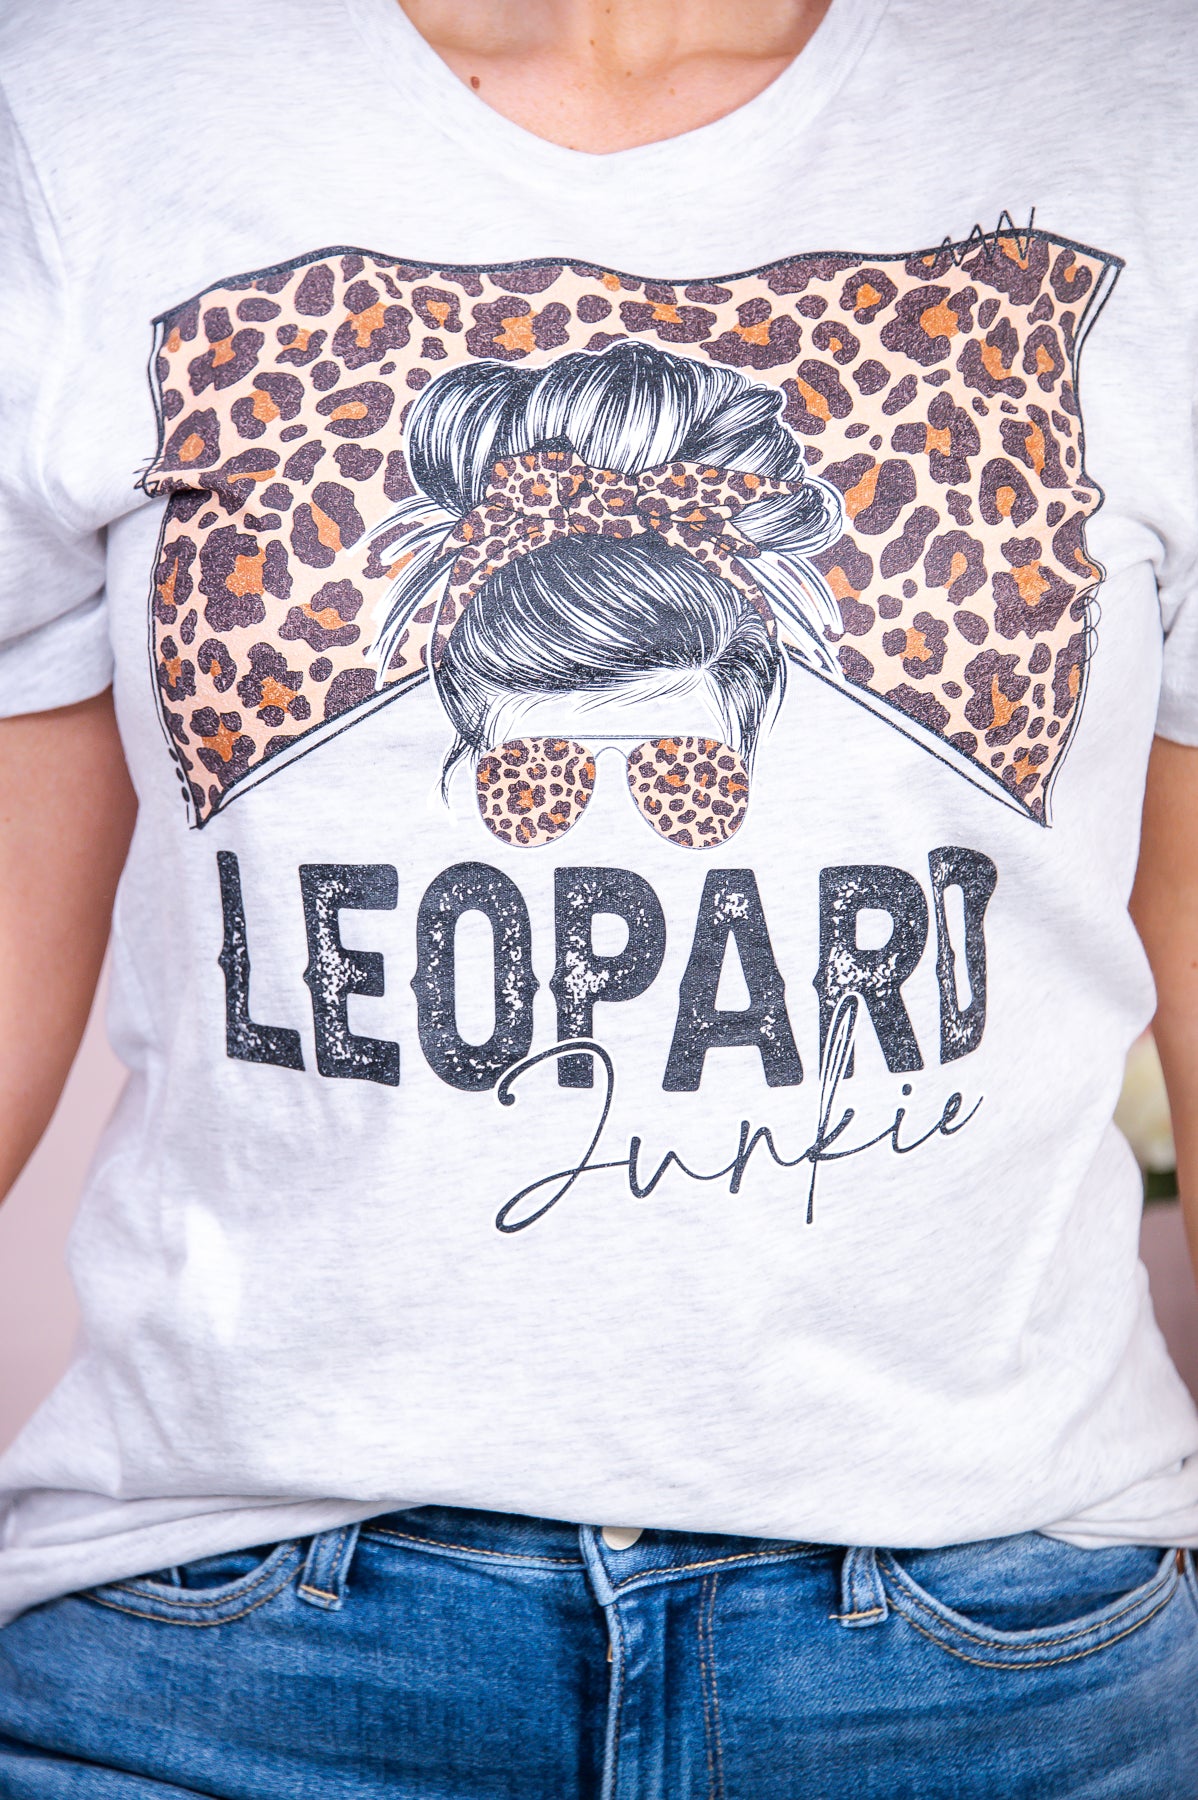 Find Your Inner Roar Ash Printed Graphic Tee - A2682AH